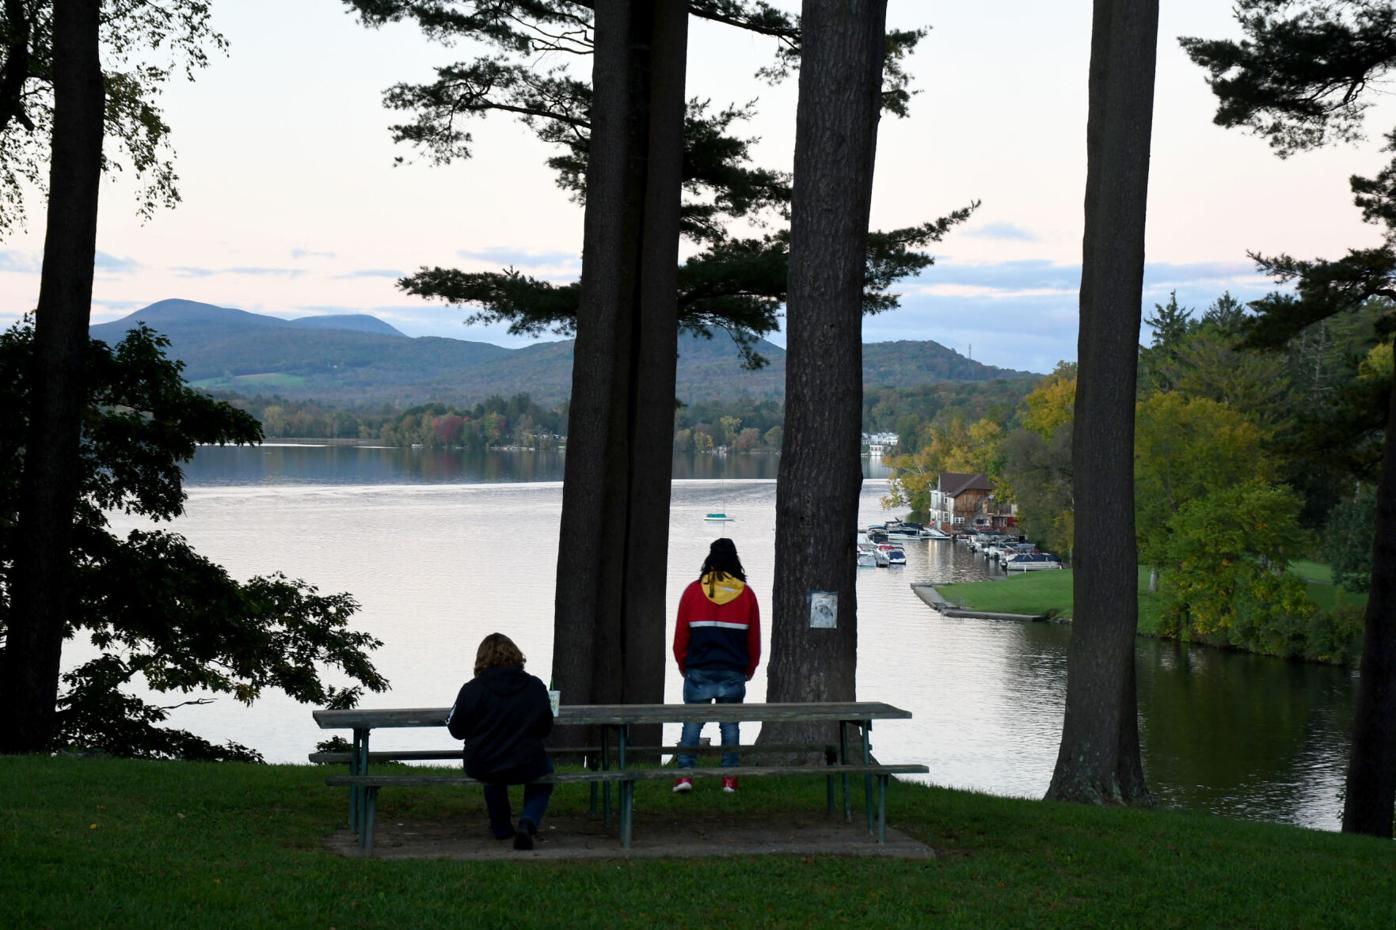 Two people look at Pontoosuc Lake through the trees